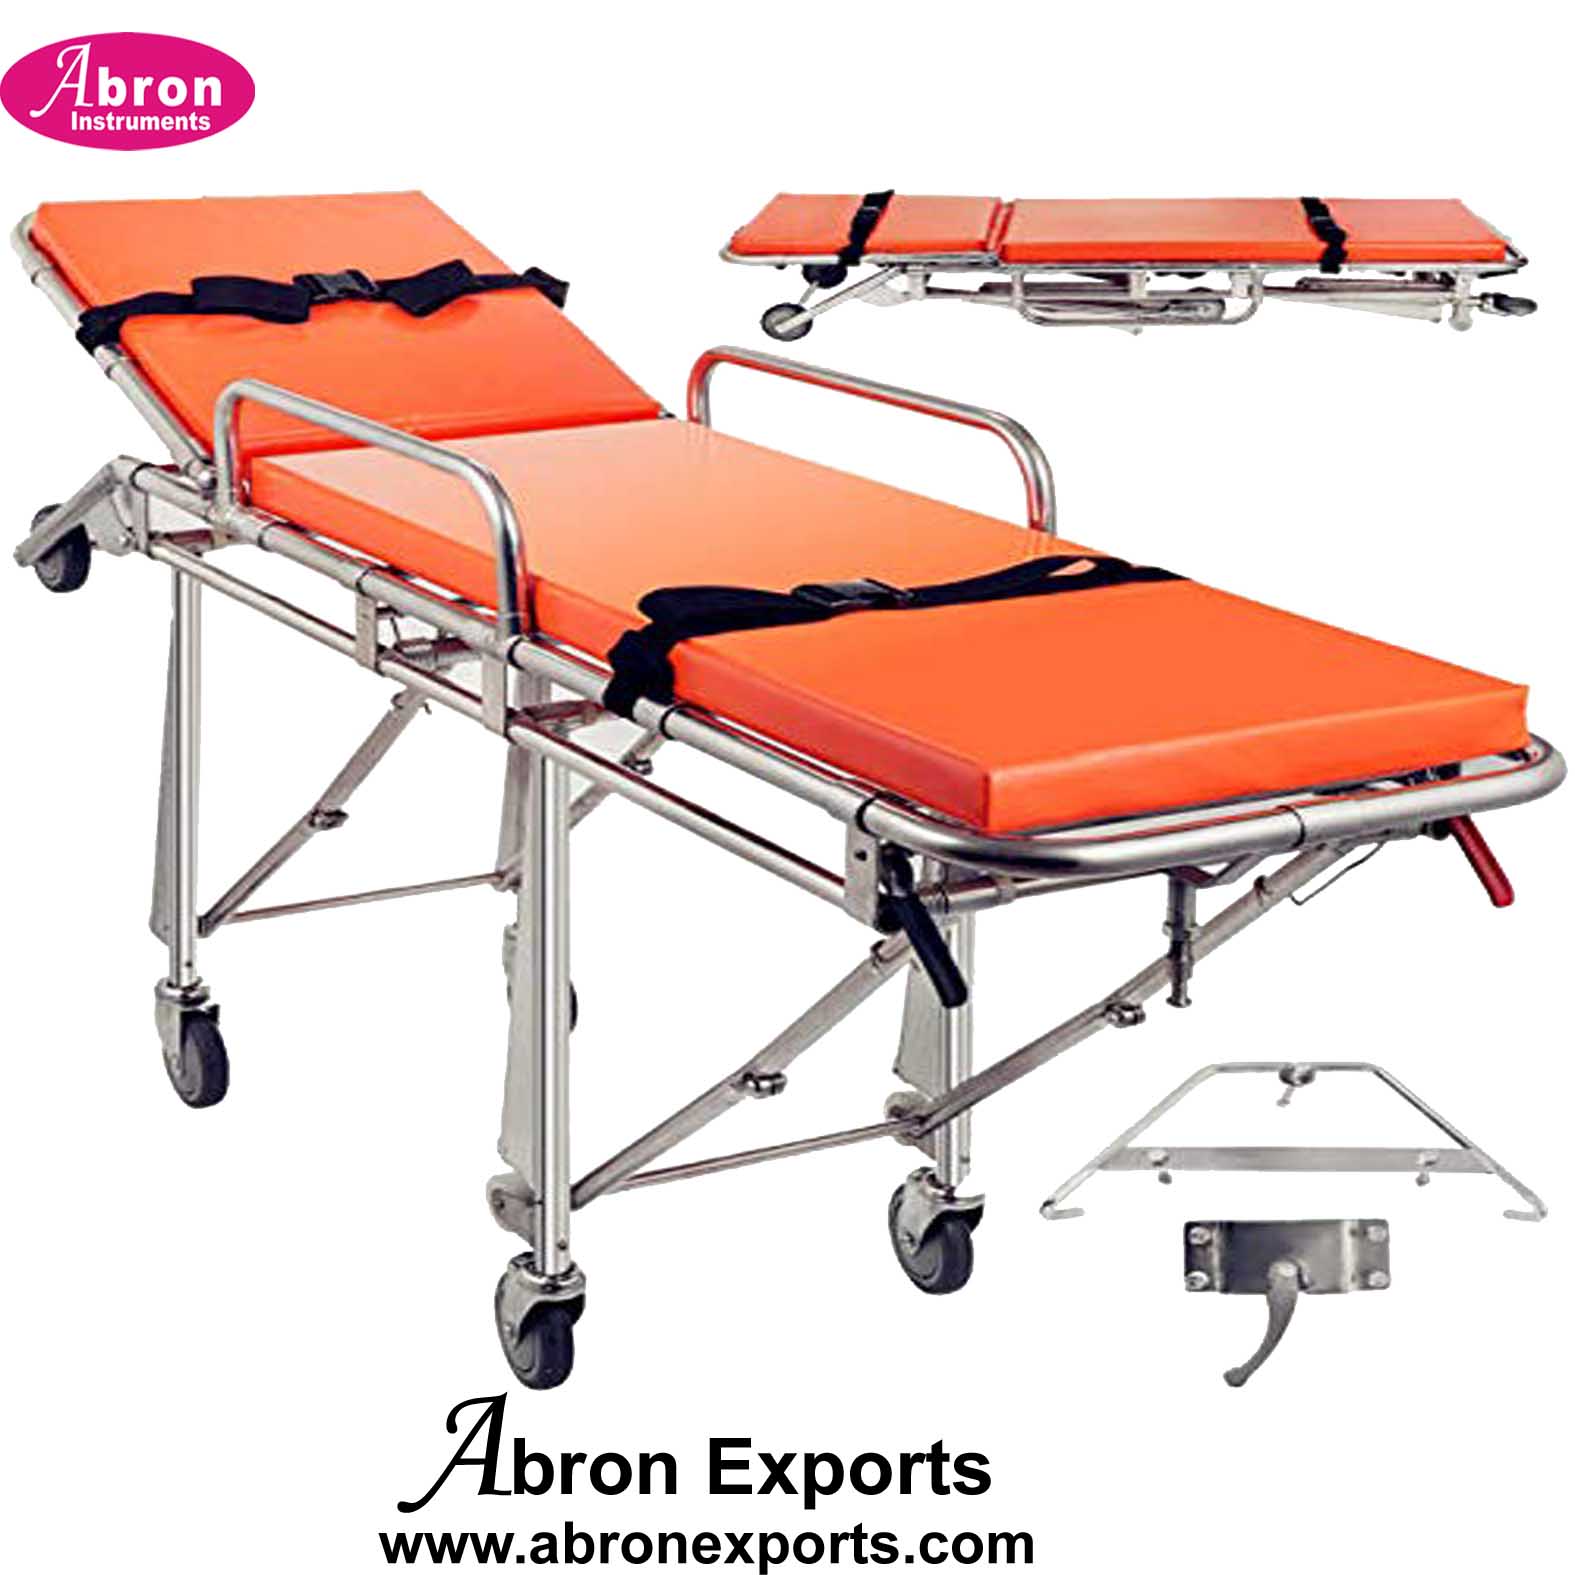 Patient Trolley Stretcher trolley with matress Autoloader Collapsible Medical Use Folding Ambulance abron ABM-2261-SBA1